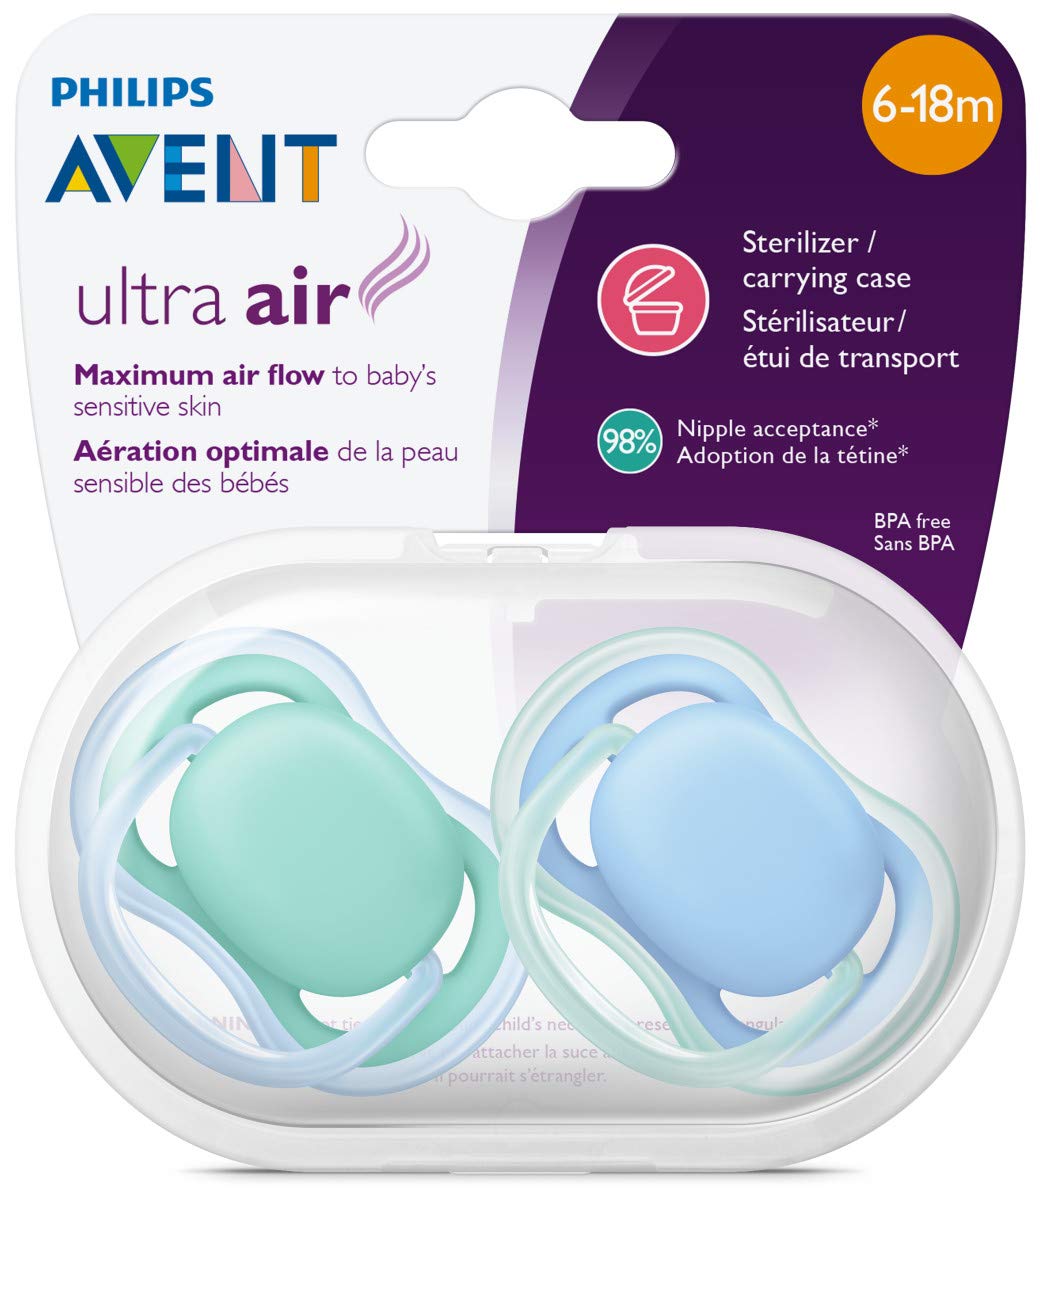 Philips Avent Ultra Air Pacifier, 6-18M, Blue/Green - 2 Pack